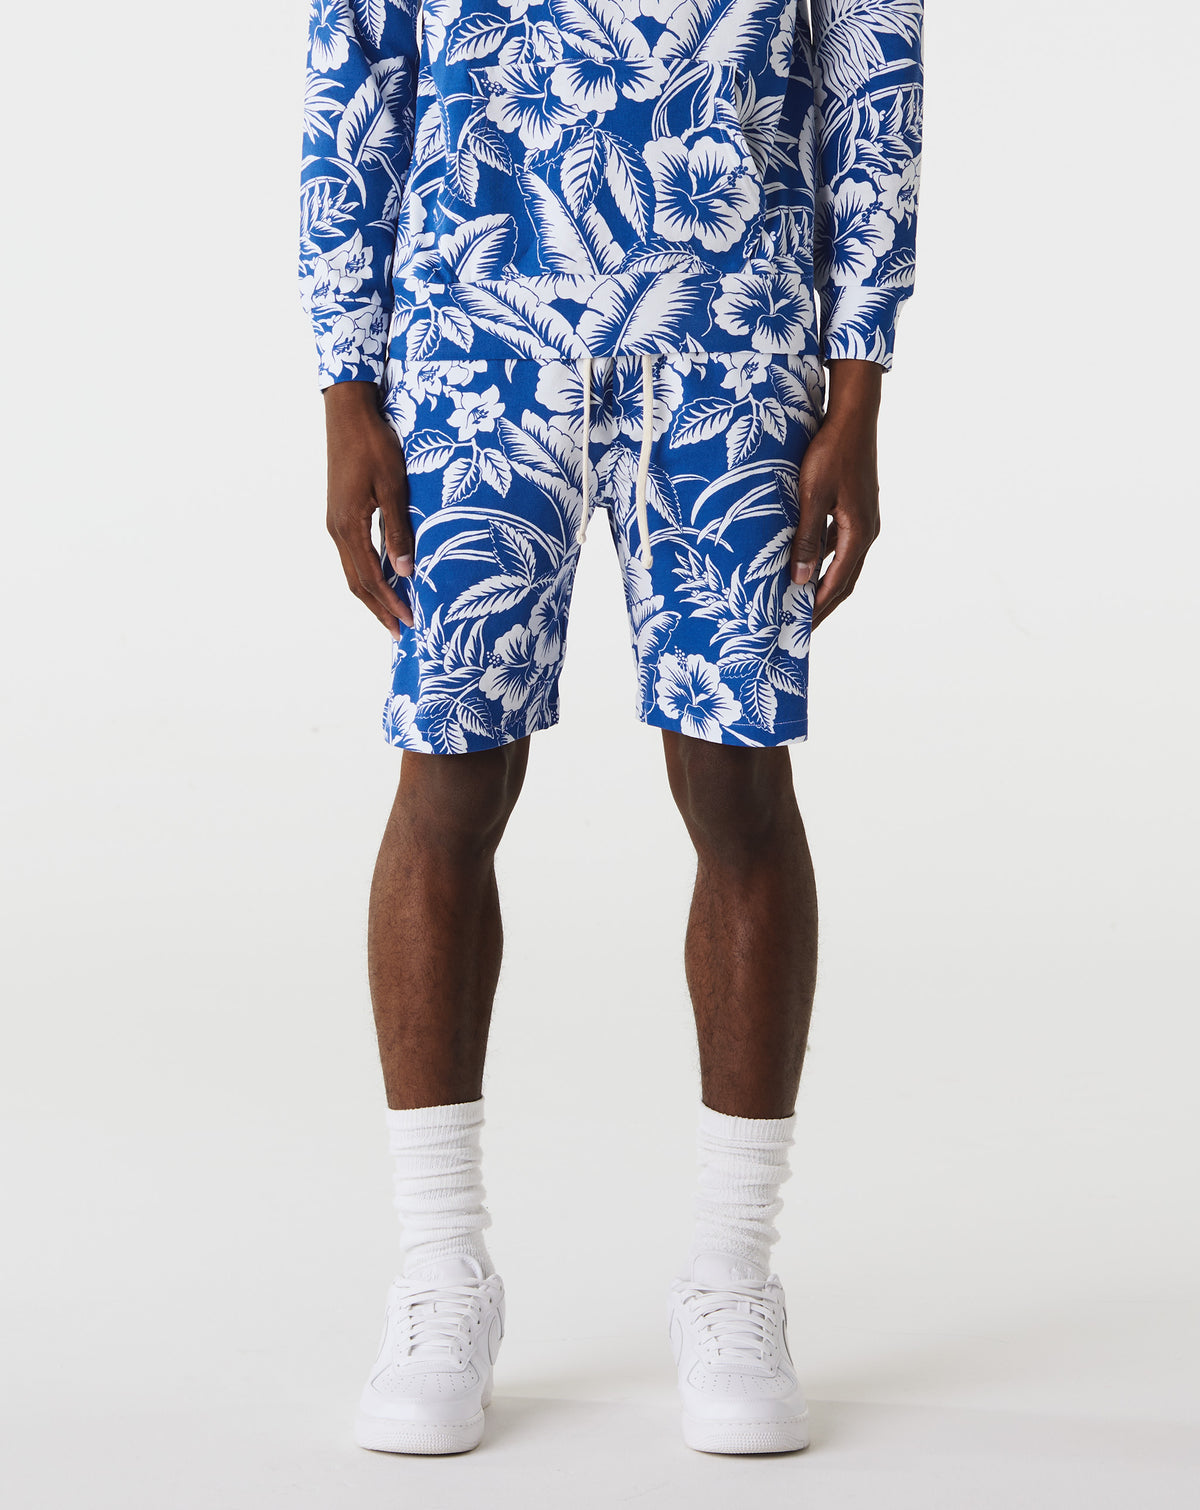 Polo Ralph Lauren Spa Terry Cotton Shorts - Rule of Next Apparel